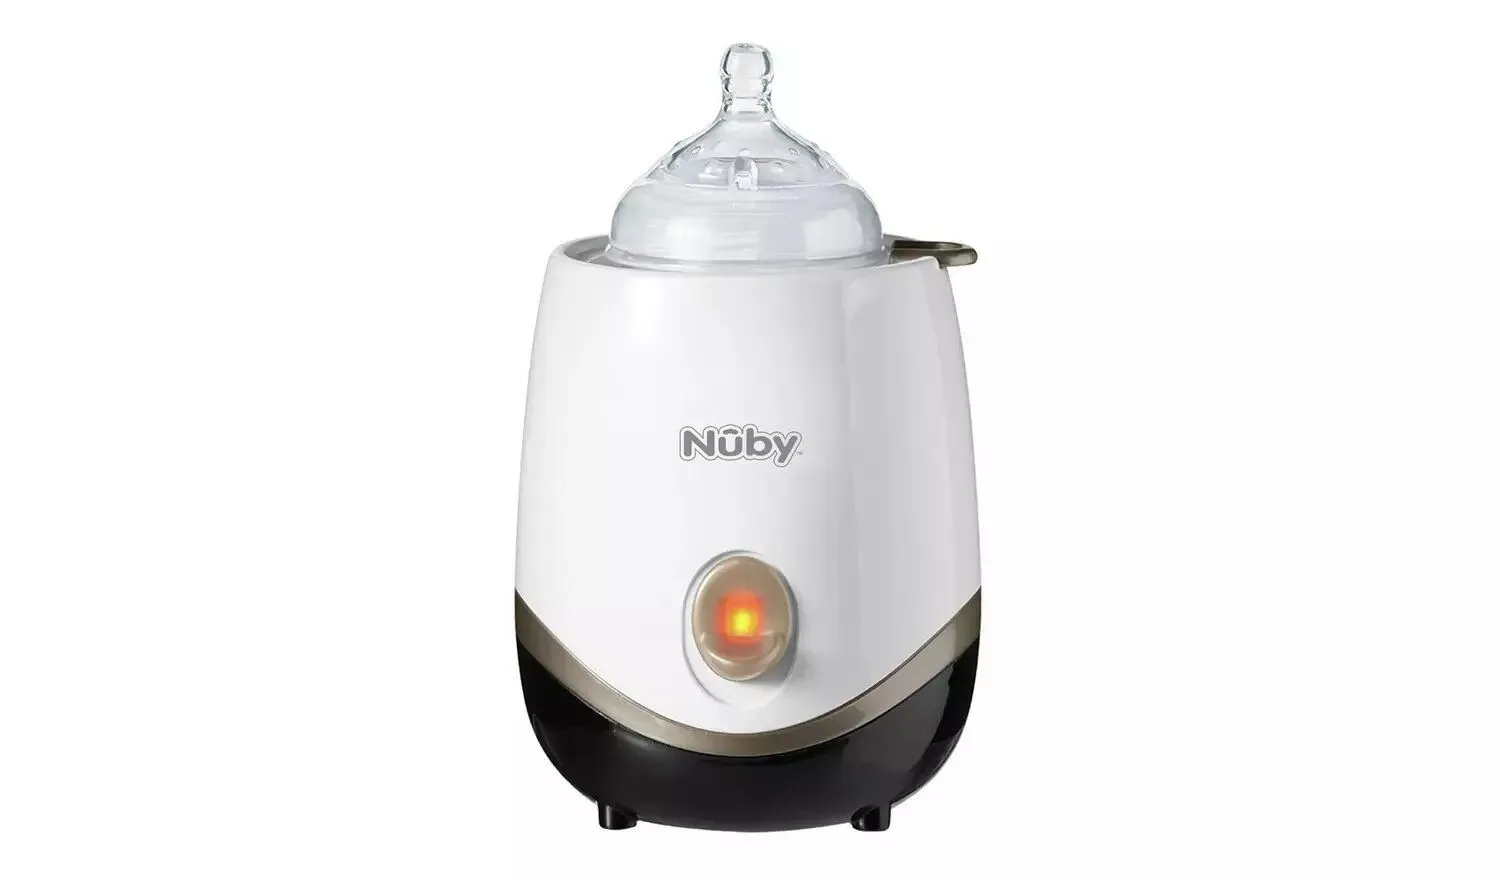 Nuby Electric Baby Bottle and Food Warmer.